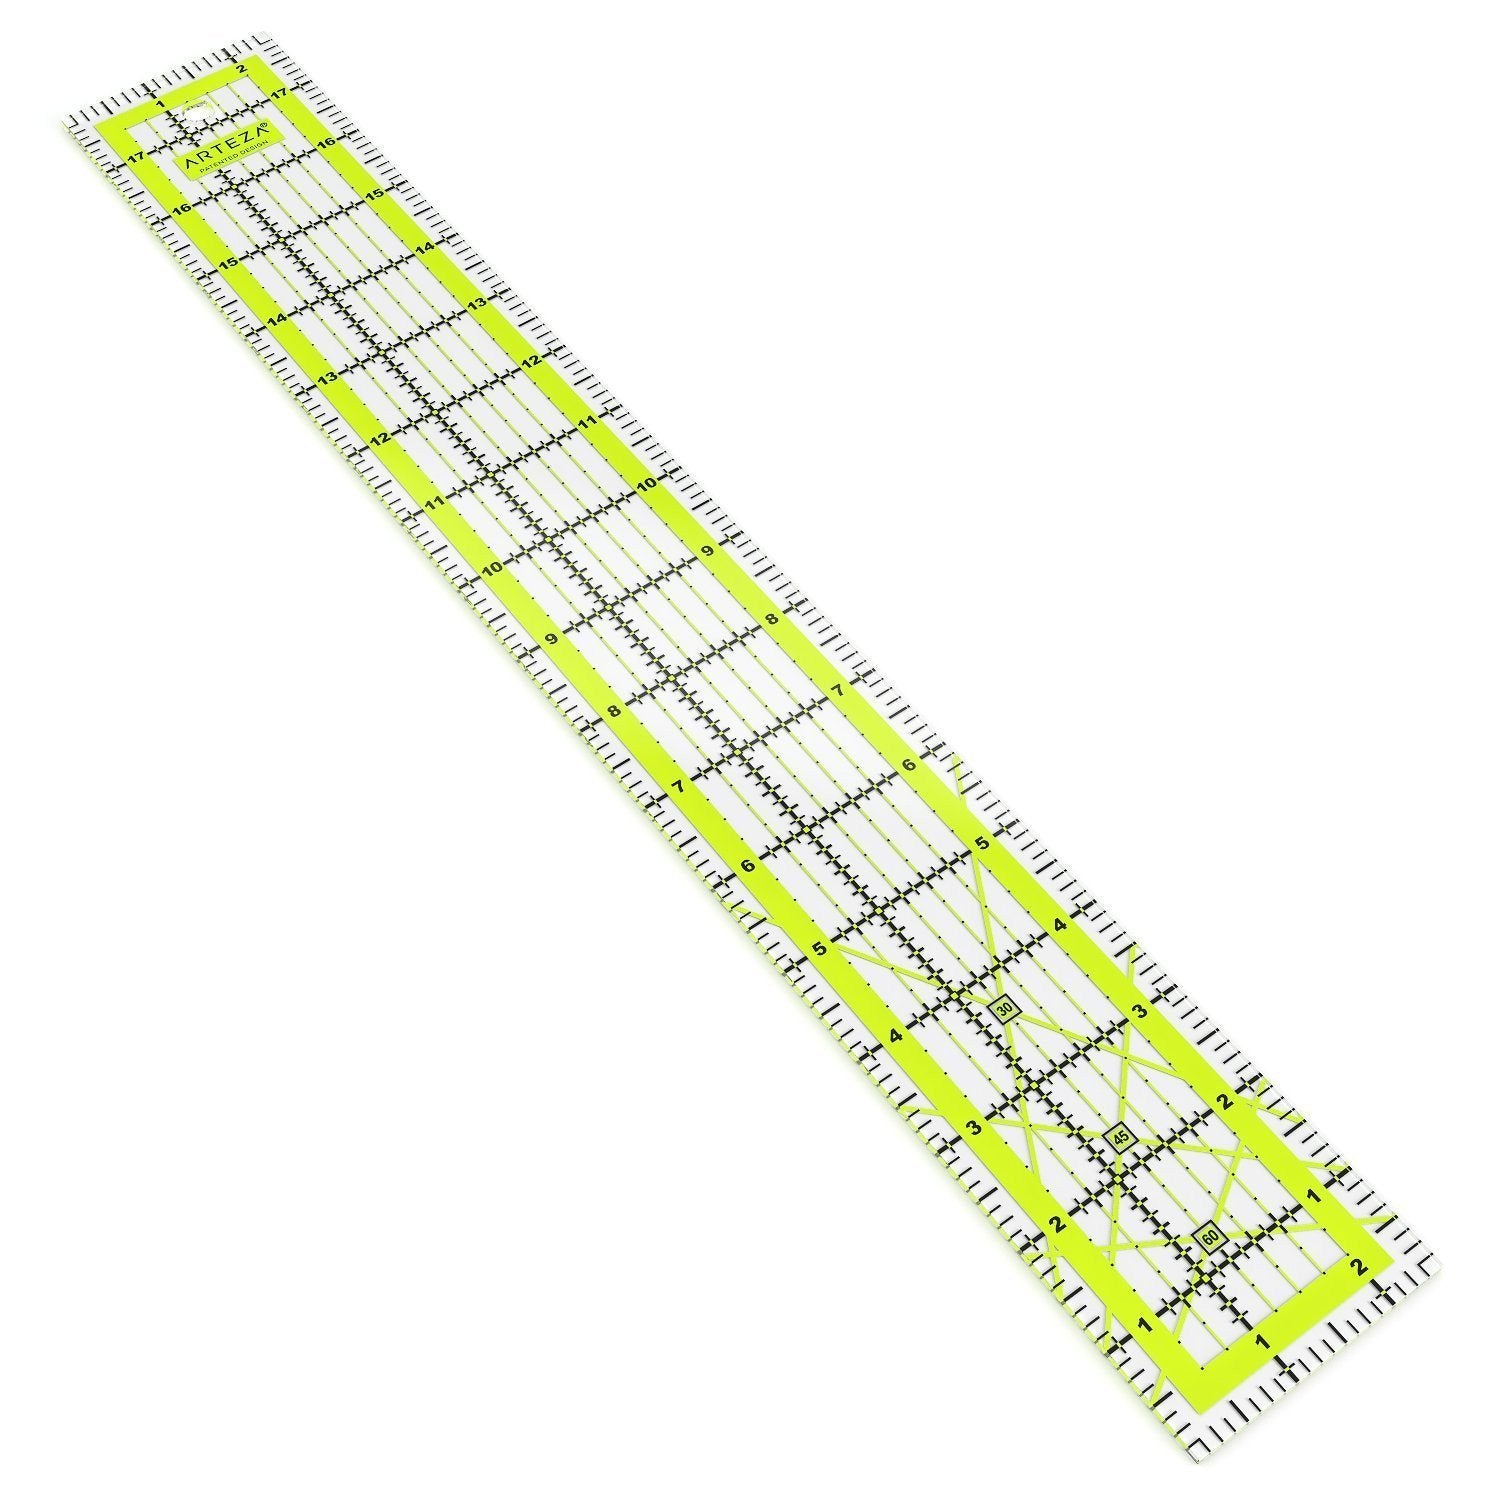  Kollase Quilting Rulers, 2 Pcs Sewing Rulers, Sewing Needles 50  pcs, Acrylic Quilting Rulers and Template, Sewing Rulers and Guides for  Fabric, 4 Square Rulers, 10 Sizes Hand Sewing Needles 